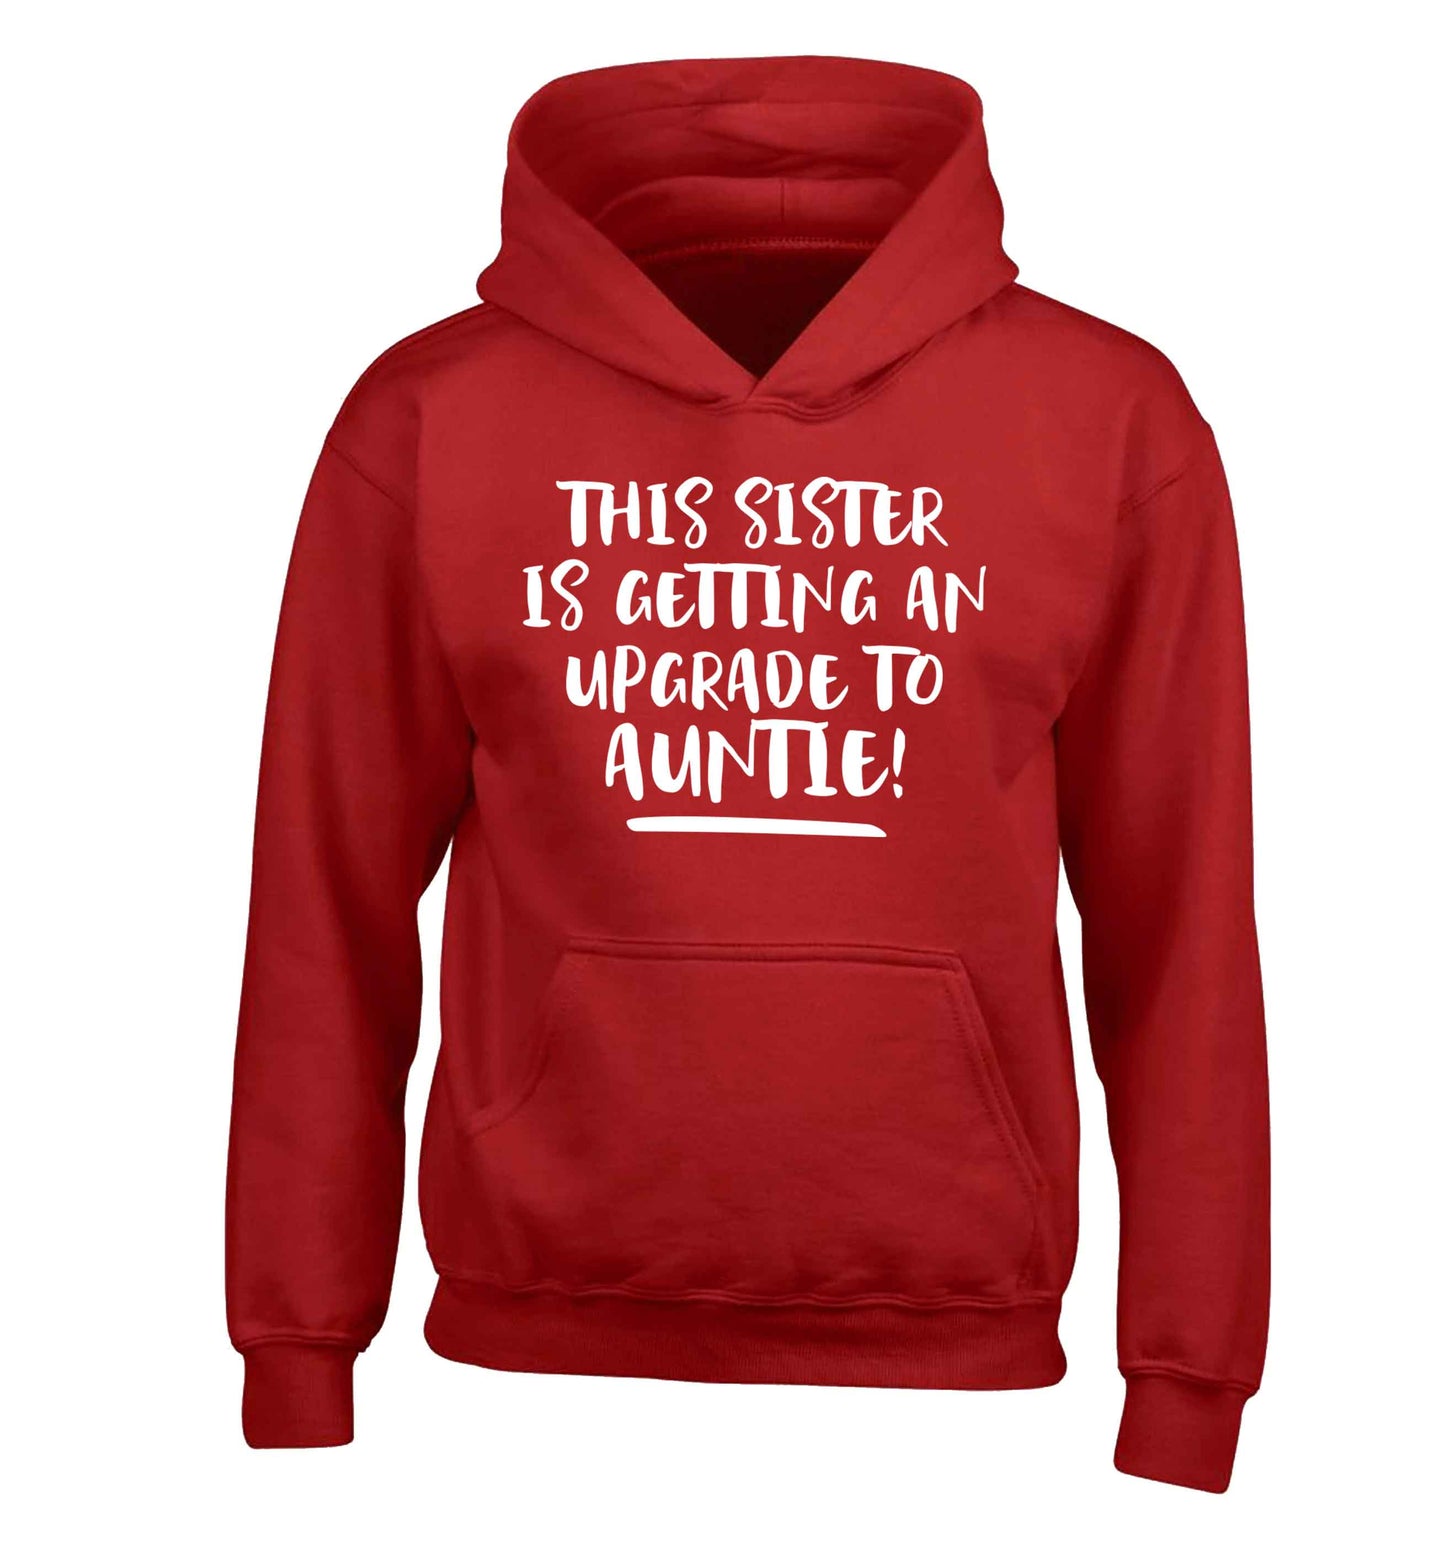 This sister is getting an upgrade to auntie! children's red hoodie 12-13 Years